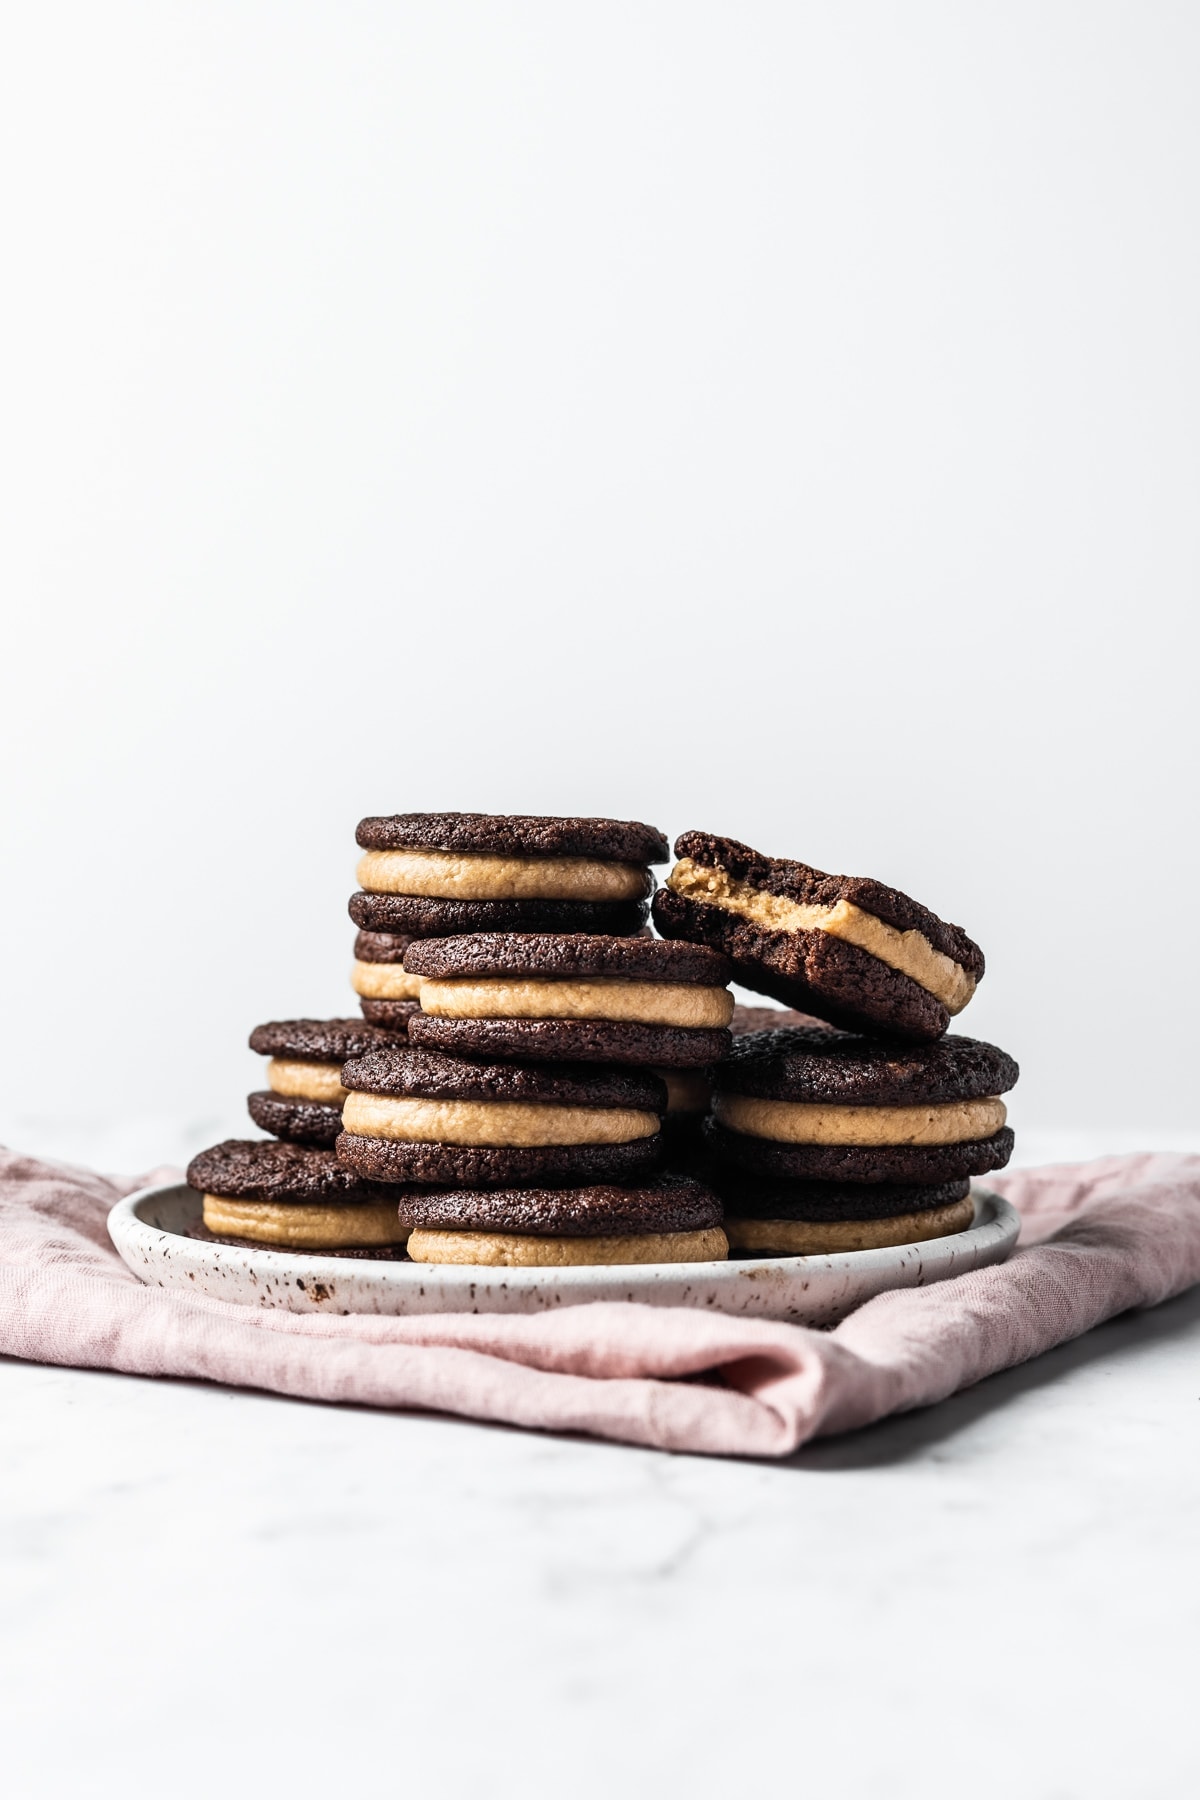 A bright and airy photo of a stack of cookies on a white speckled ceramic plate. A pink linen napkin is folded underneath on a white marble surface.